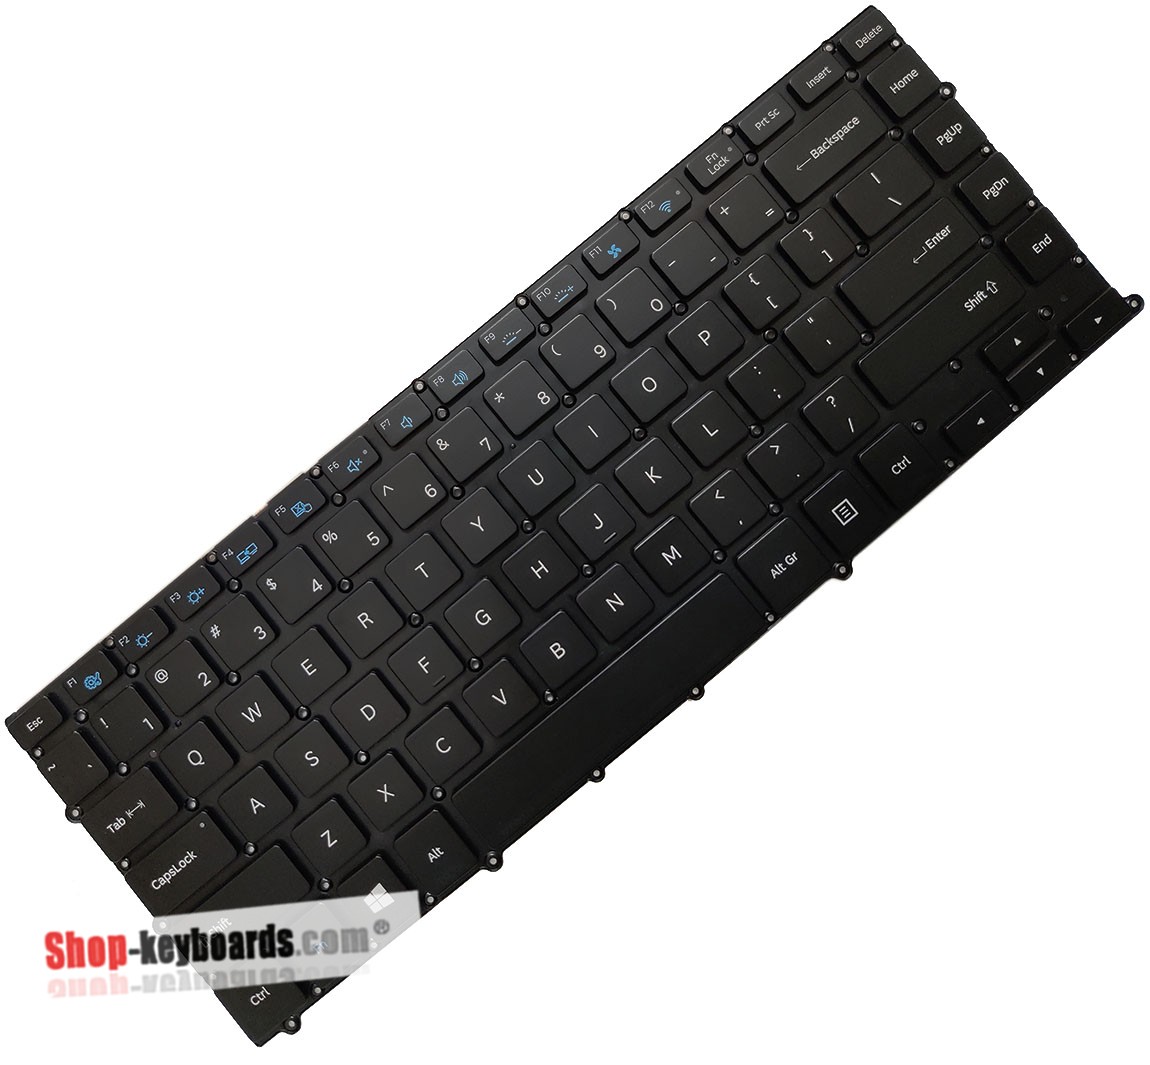 Samsung NP900X4C-A01US Keyboard replacement